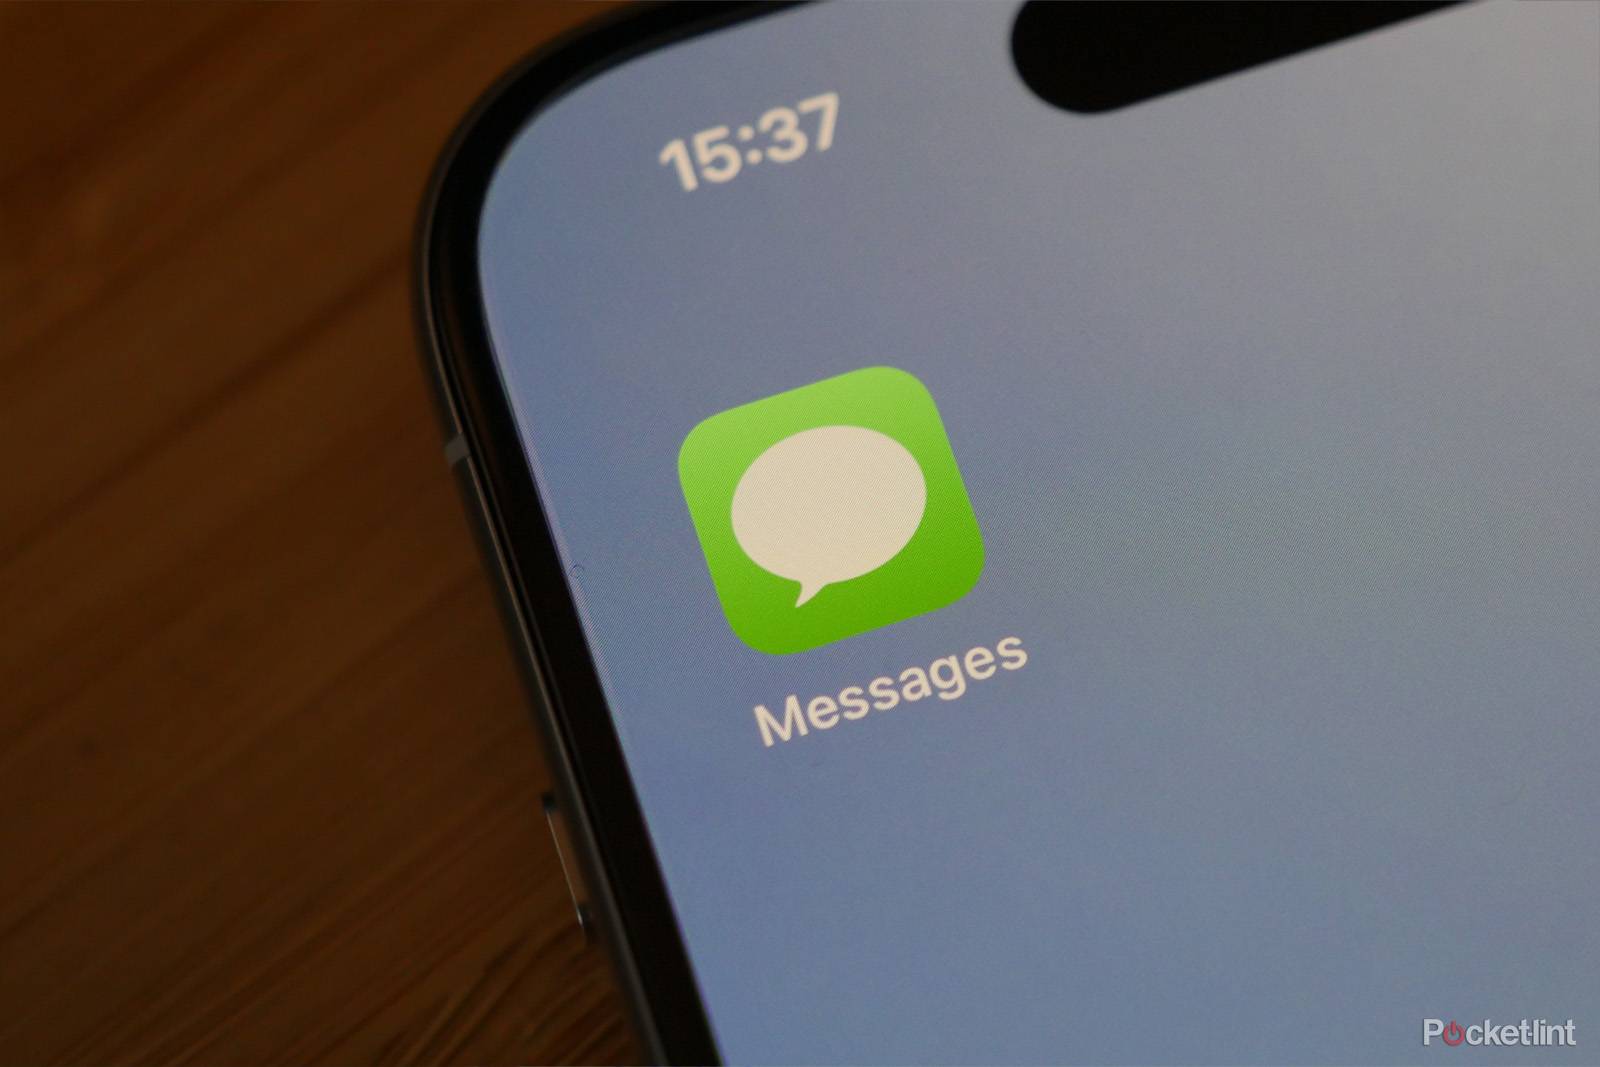 The iPhone is getting RCS messaging support soon, here's what that means for you